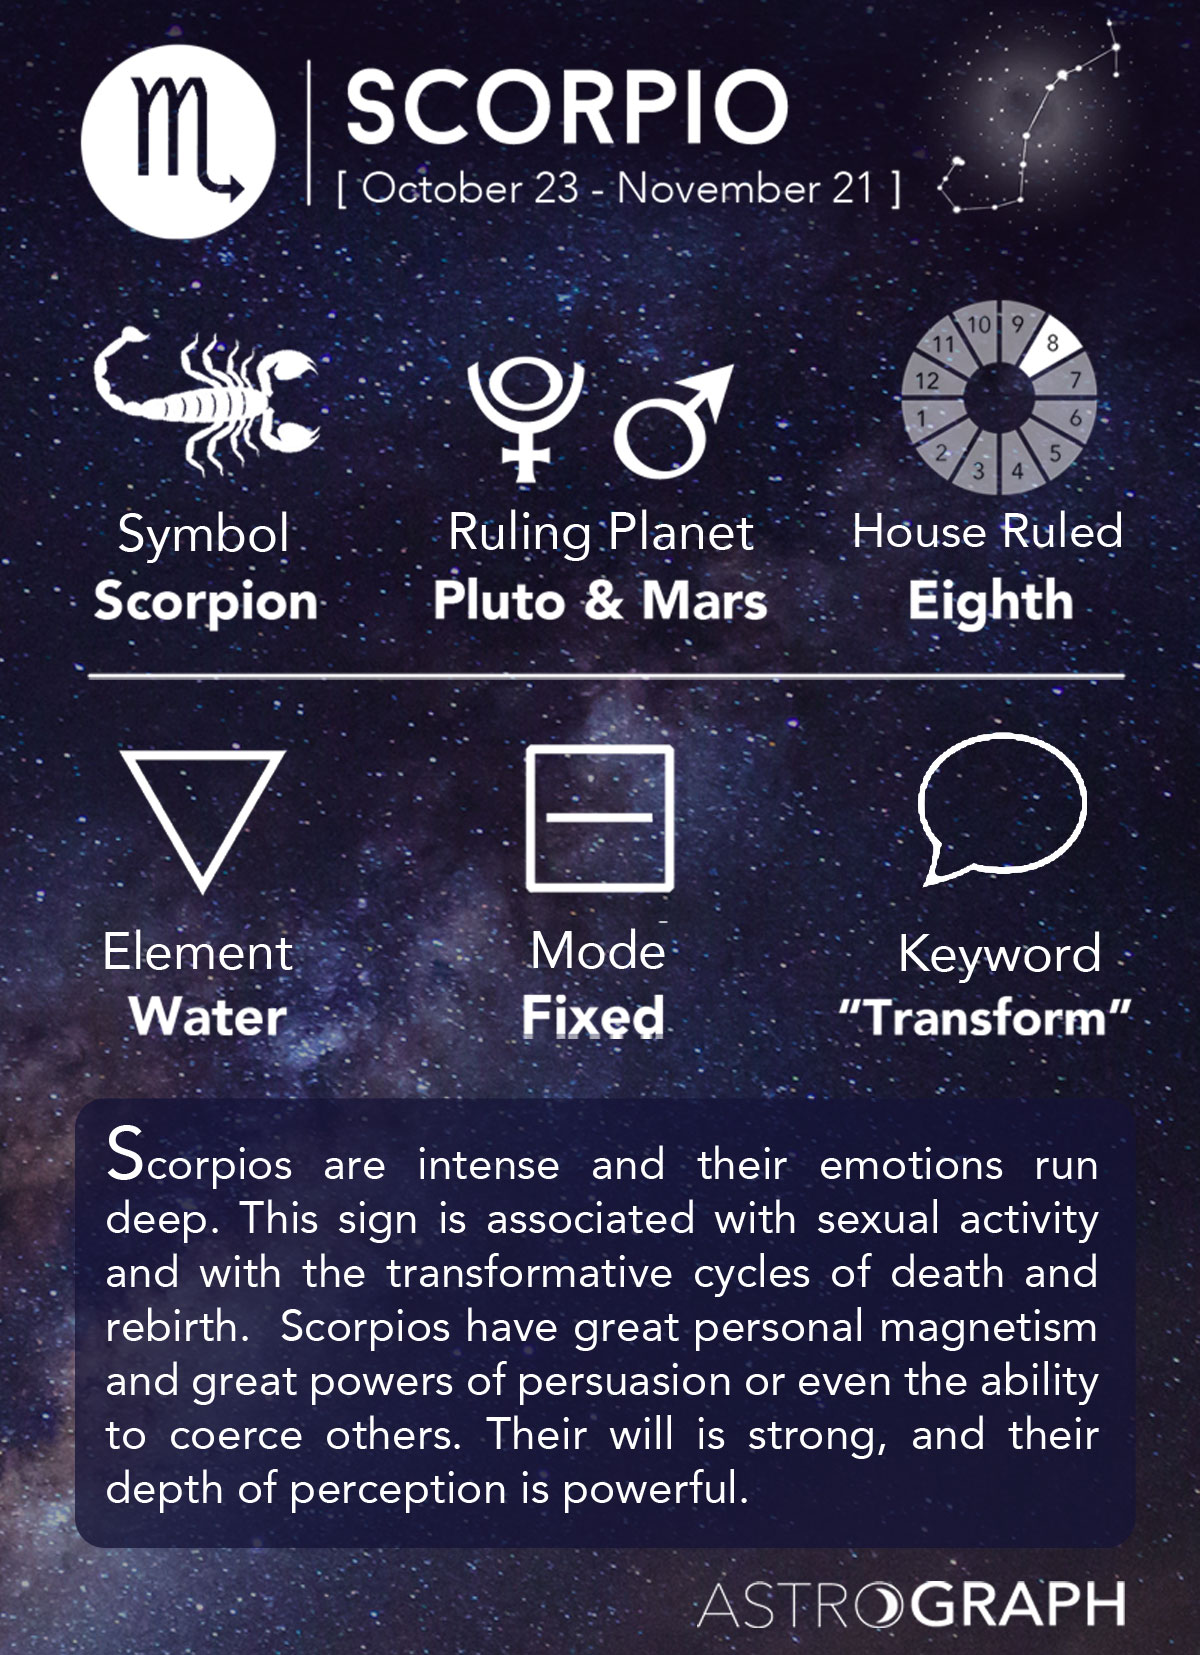 What's the stereotype about Scorpios? The Student Room